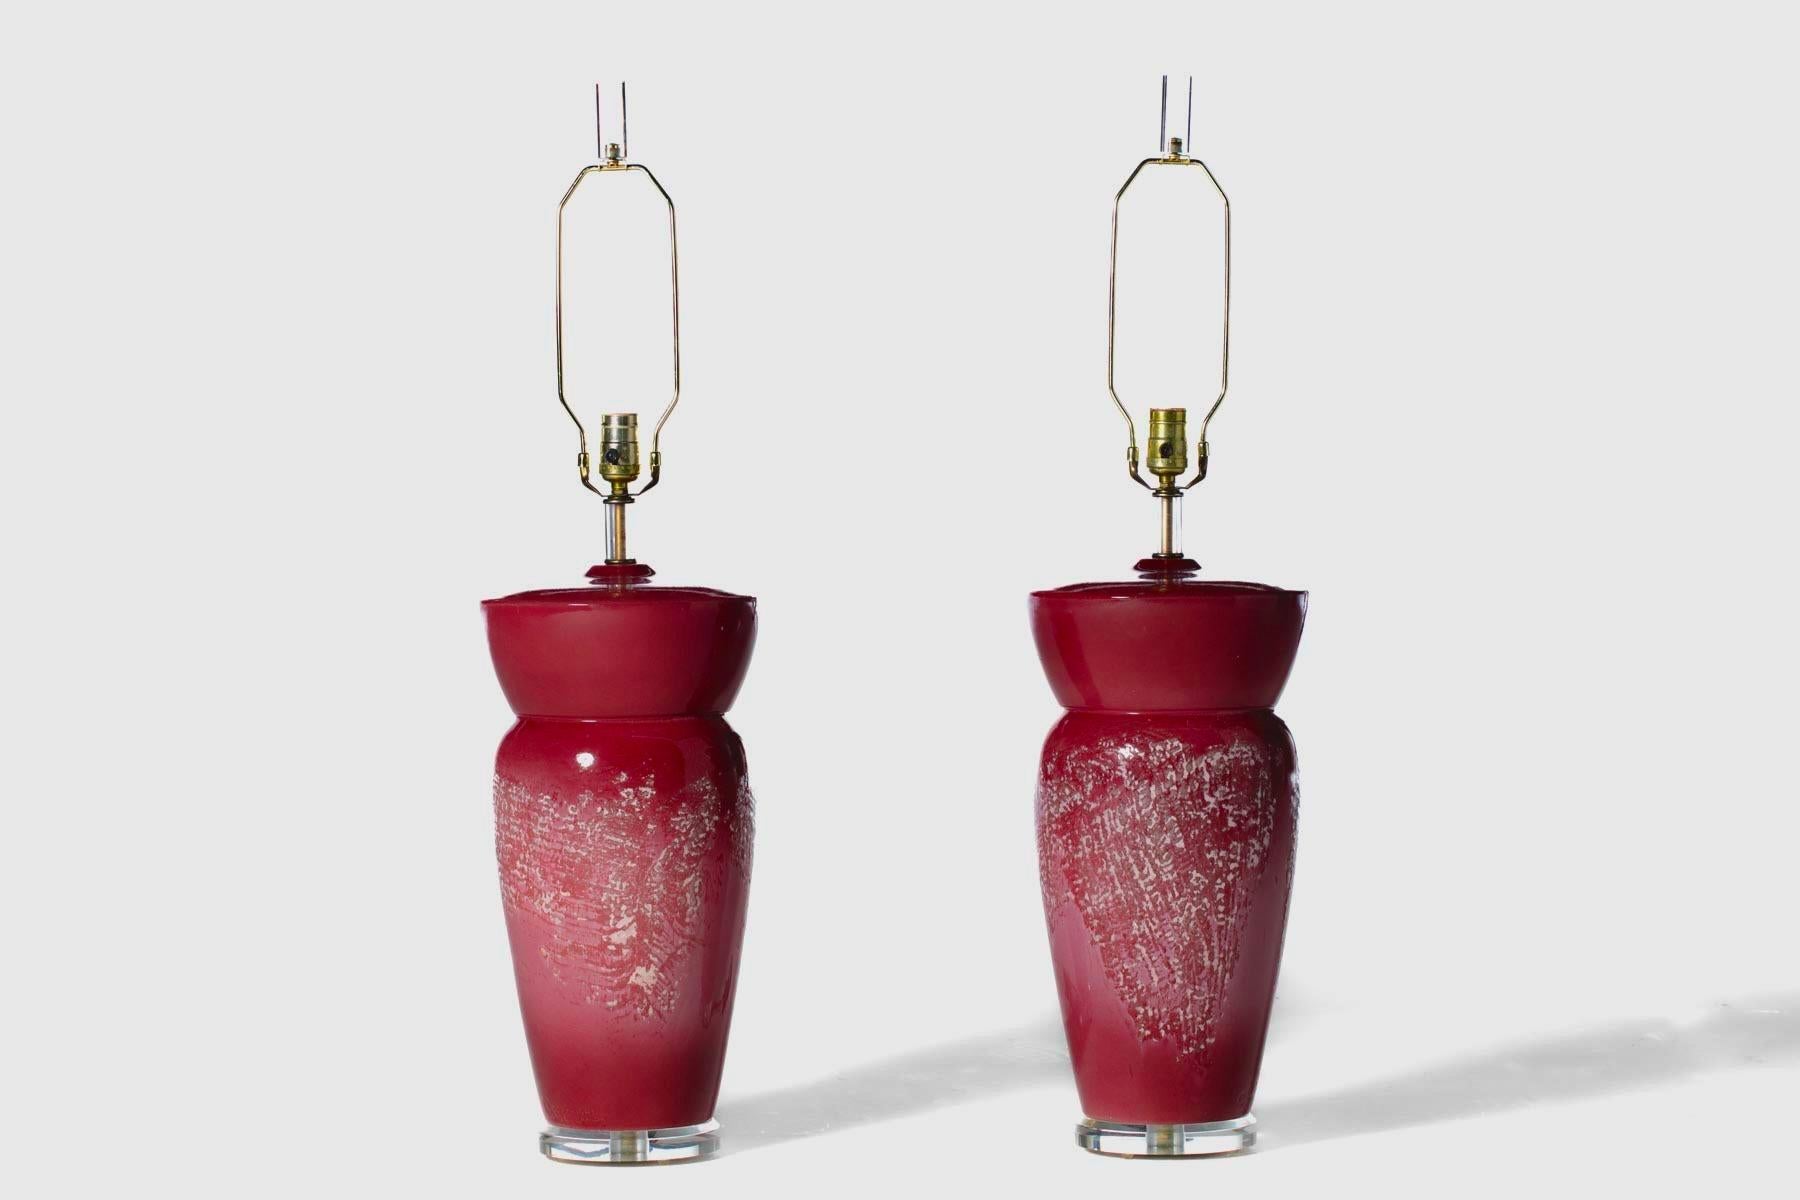 Monumental Post Modern Raspberry Pink Sorbet Ceramic Lamps by Sunset c. 1980 For Sale 9